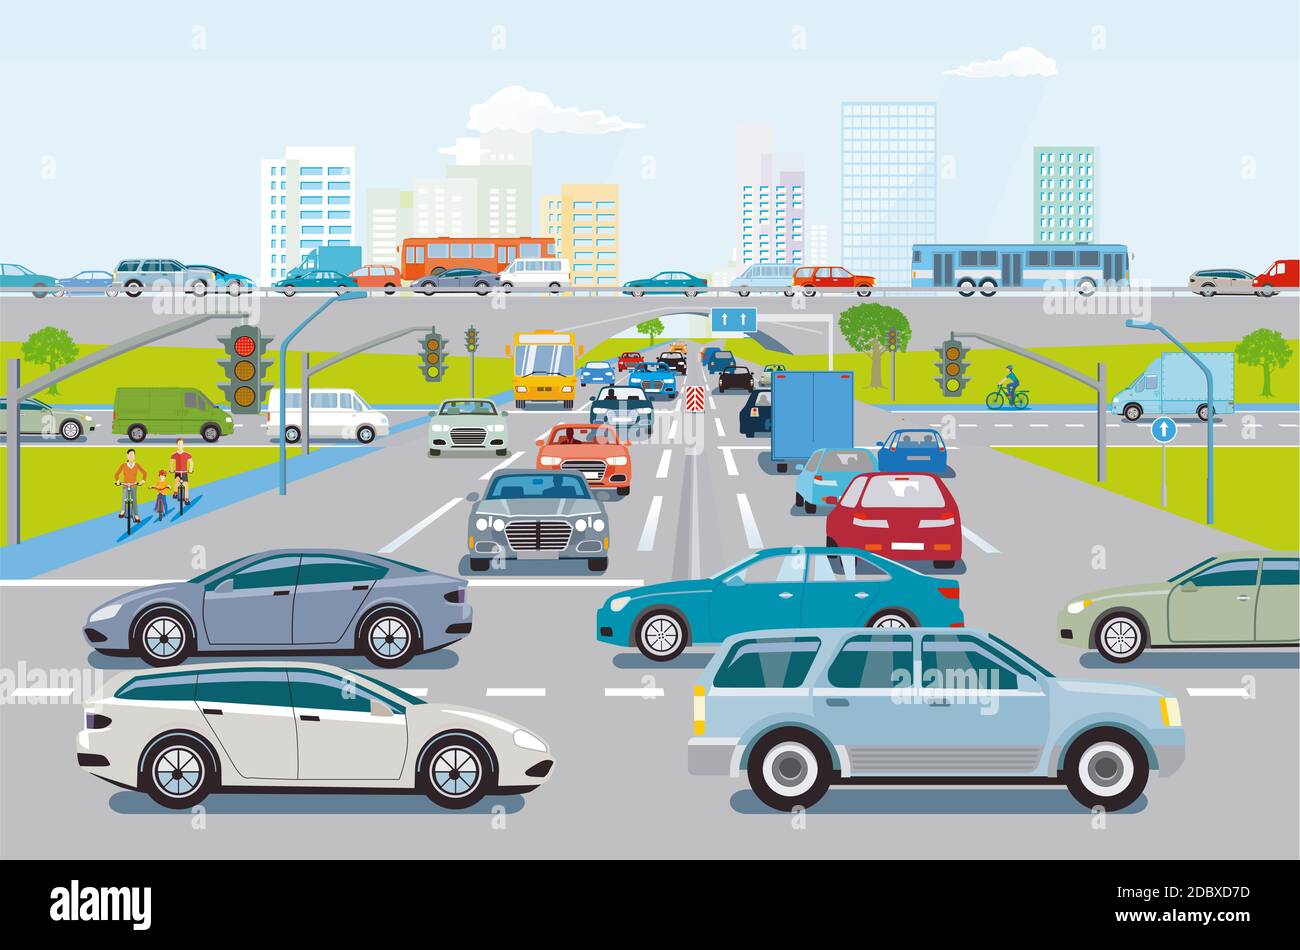 Road traffic with traffic jam at the intersection, illustration Stock Photo